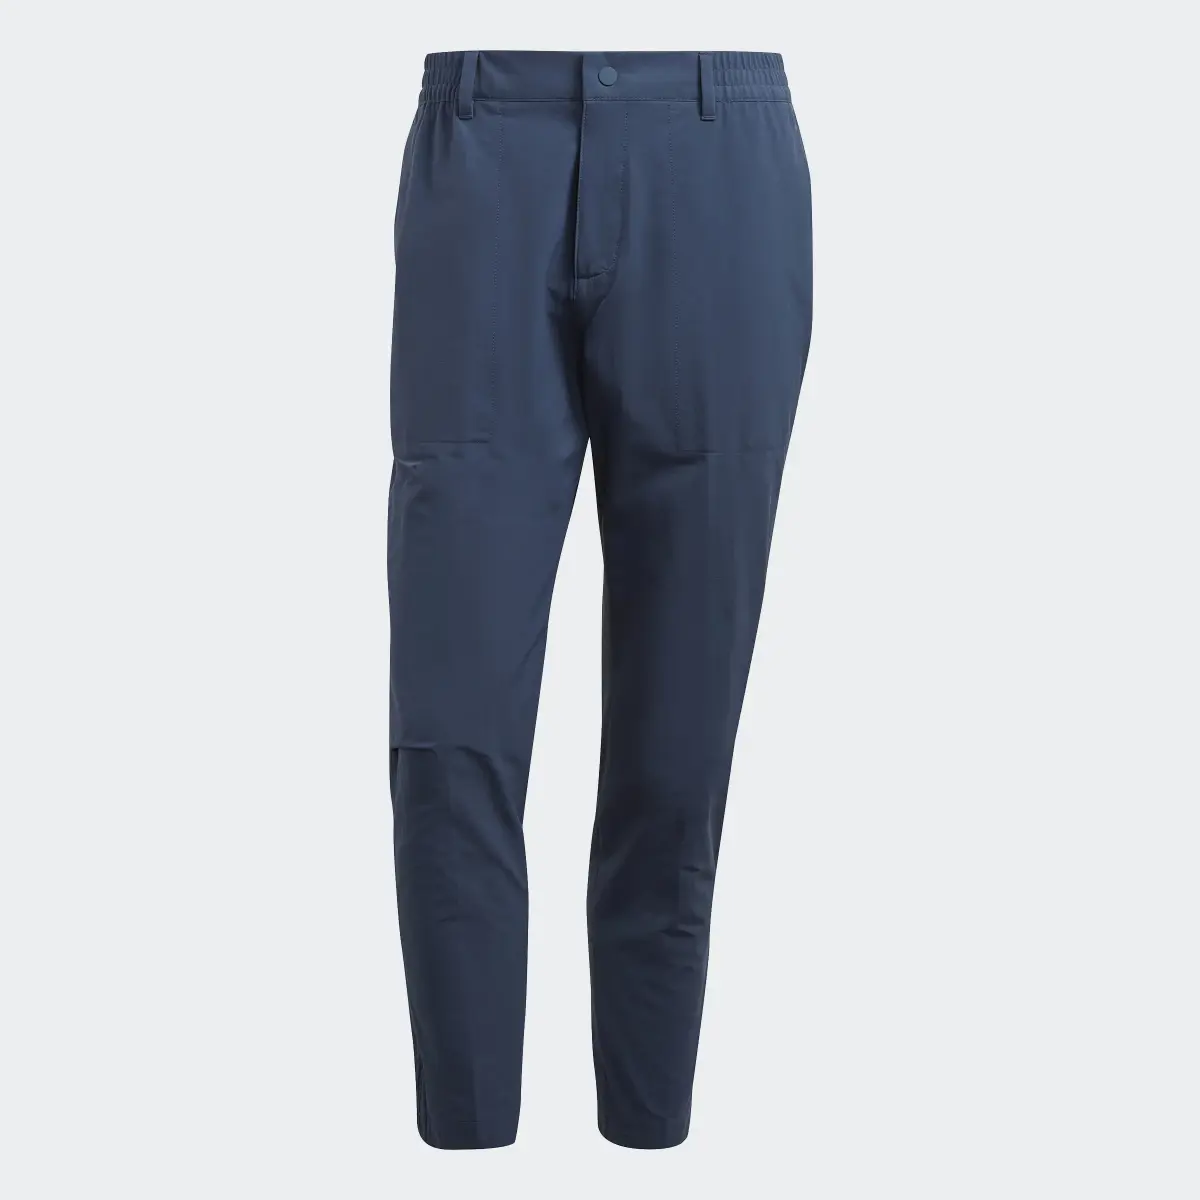 Adidas Go-To Commuter Golf Pants. 1